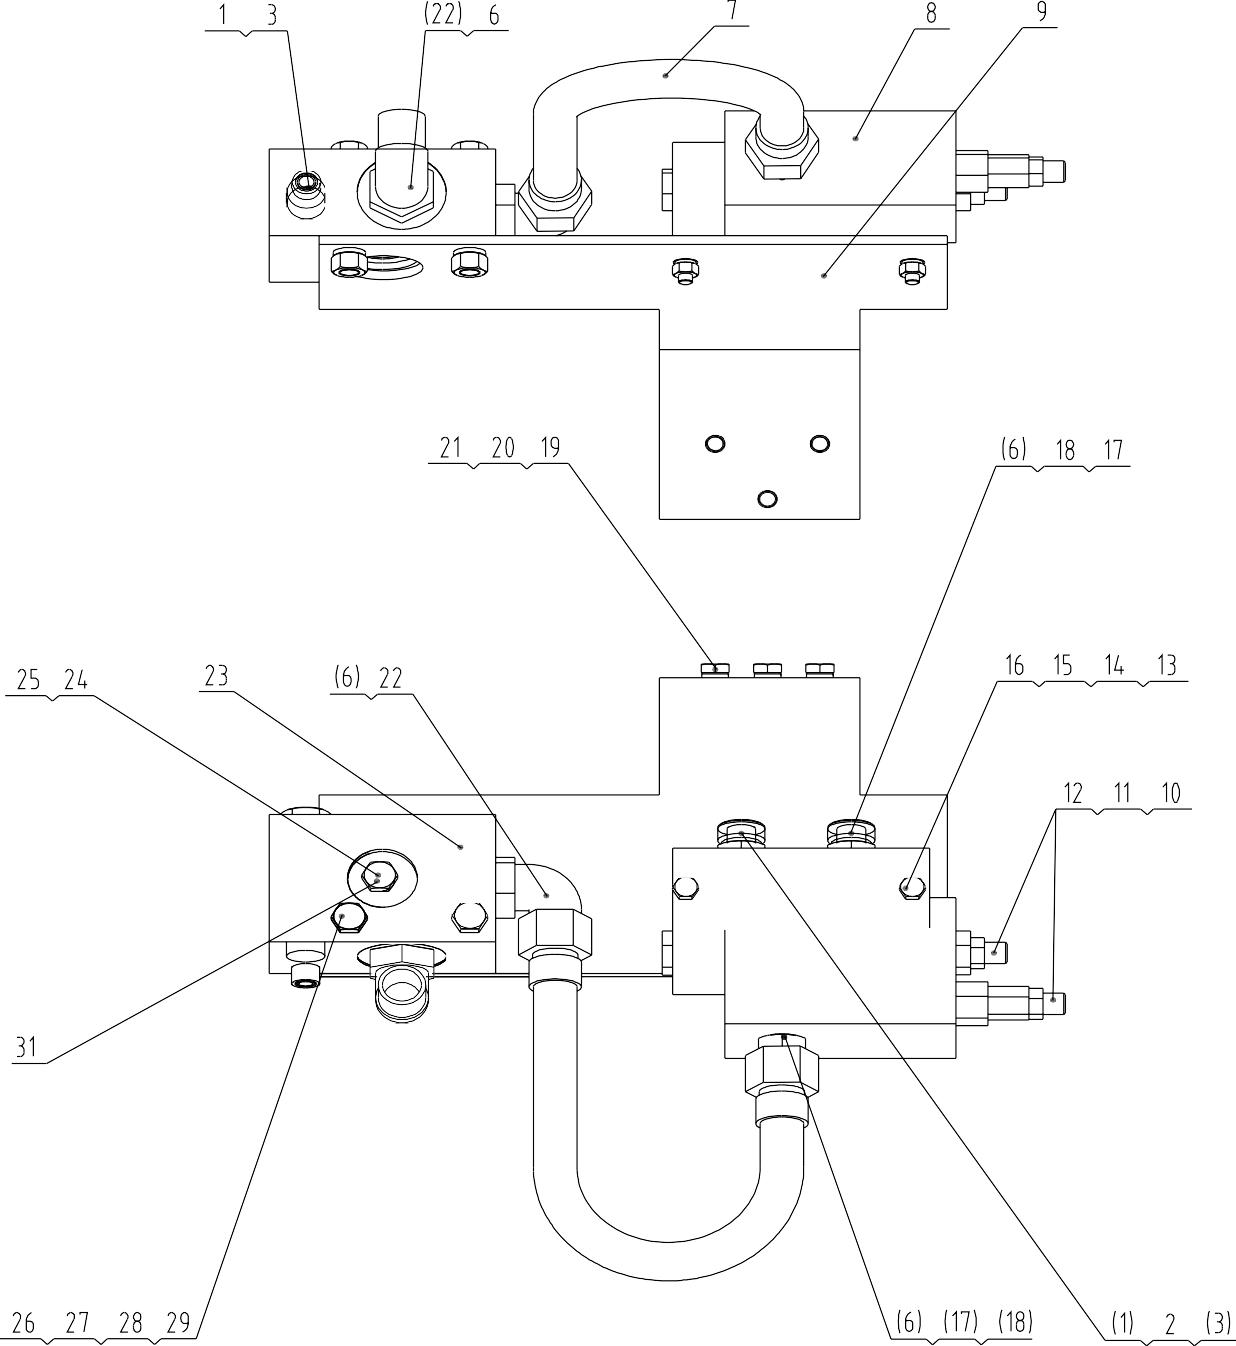 12C1255 004，PRIORITY VALVE AS, LIUGONG PARTS CATALOGUES